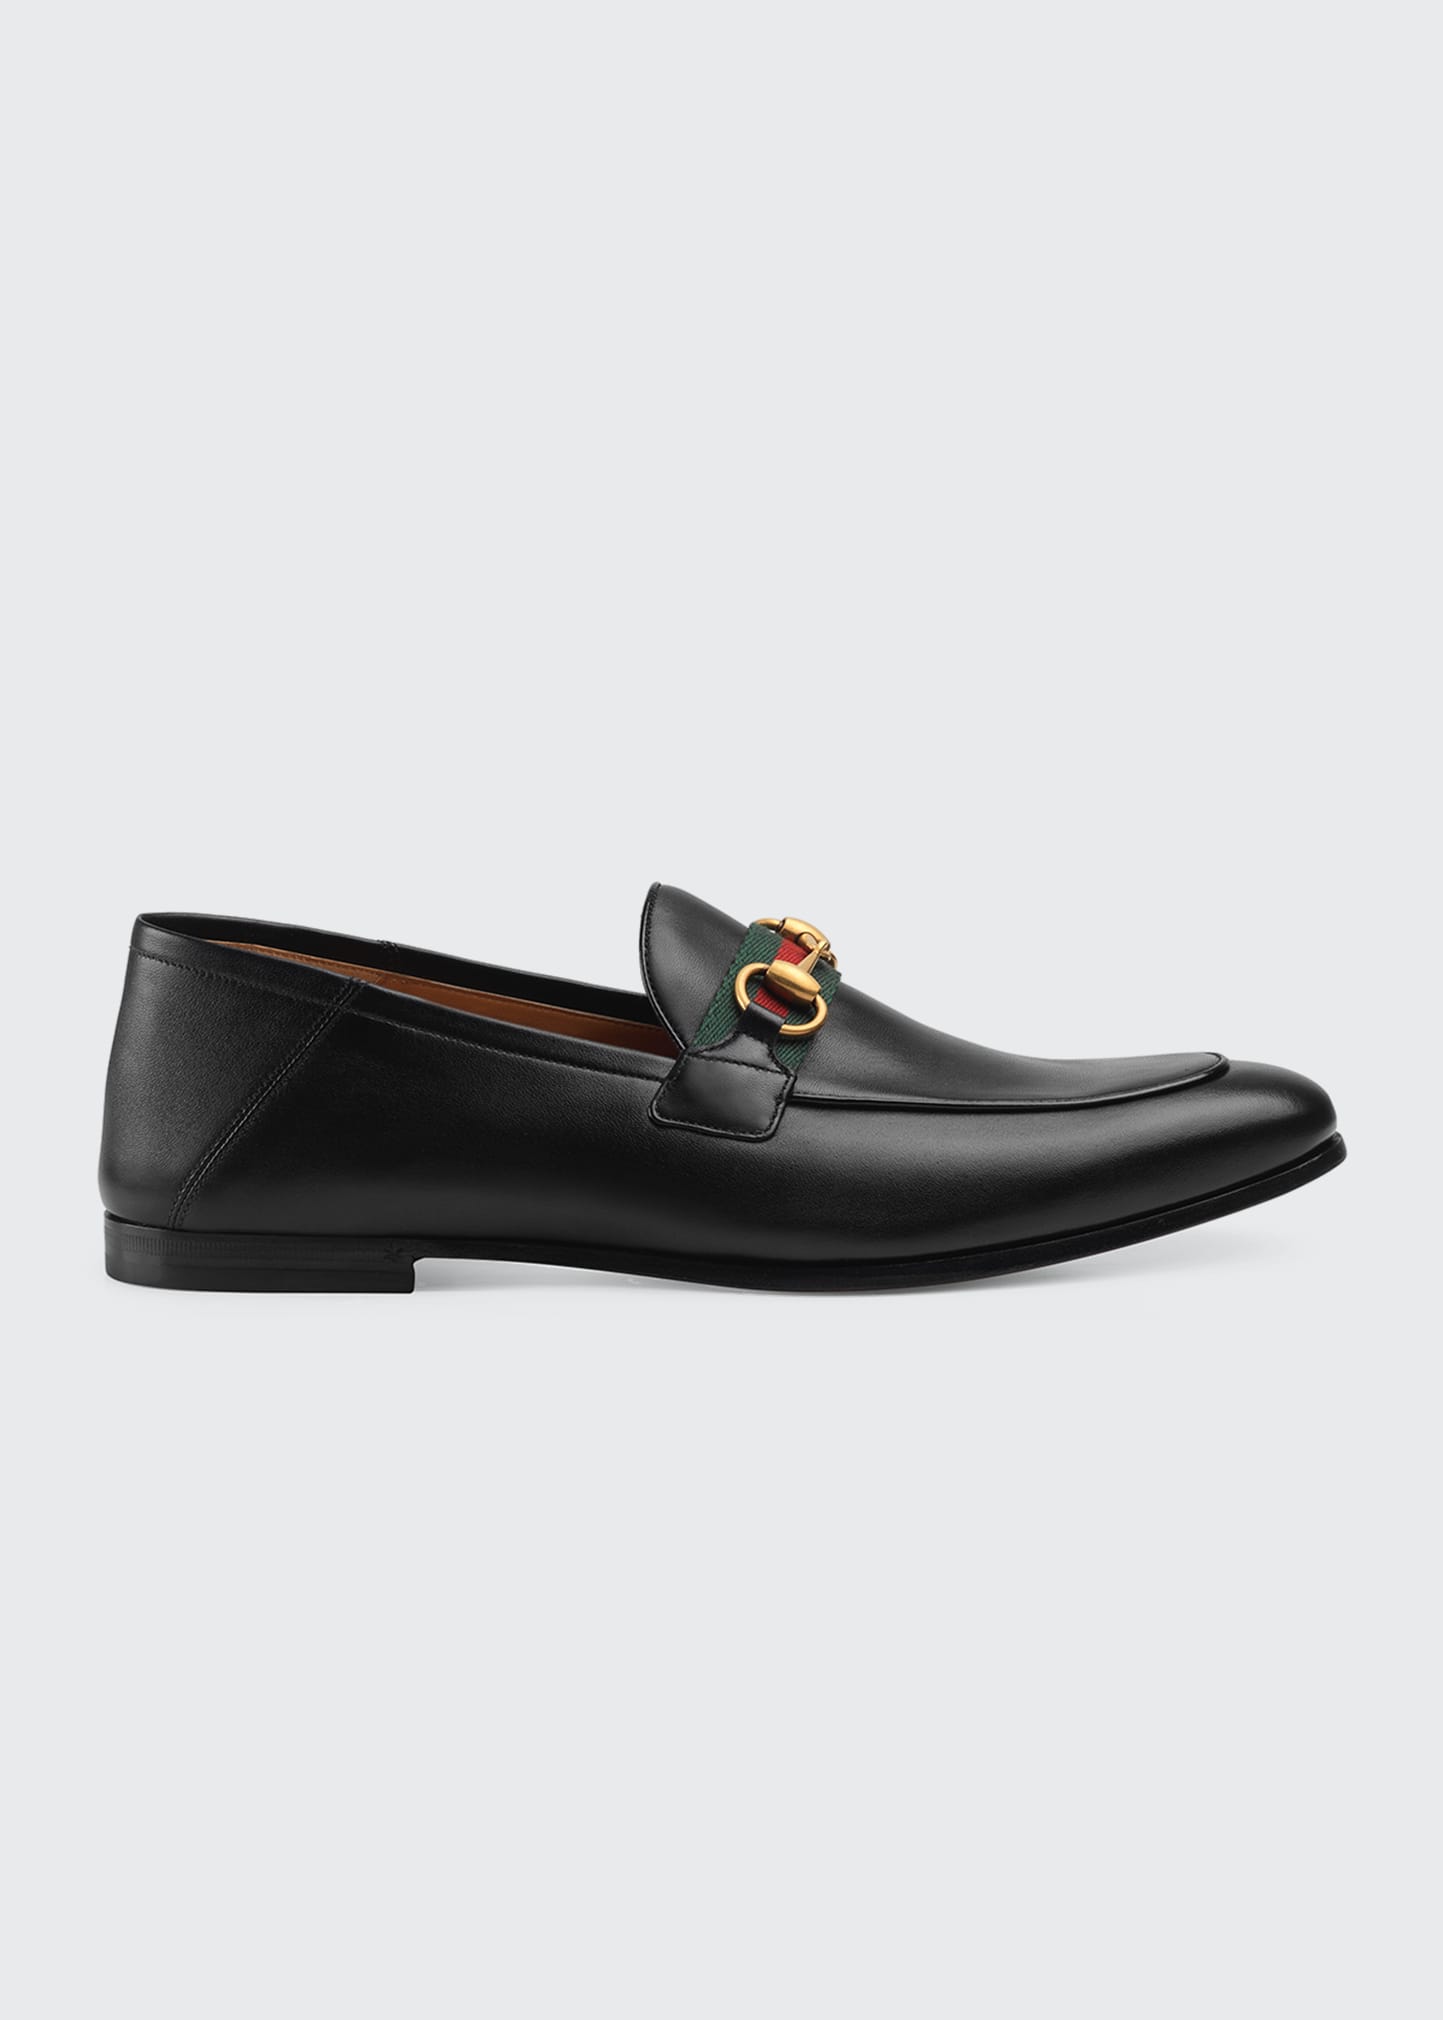 Men's GUCCI Slippers Sale, Up 70% Off | ModeSens